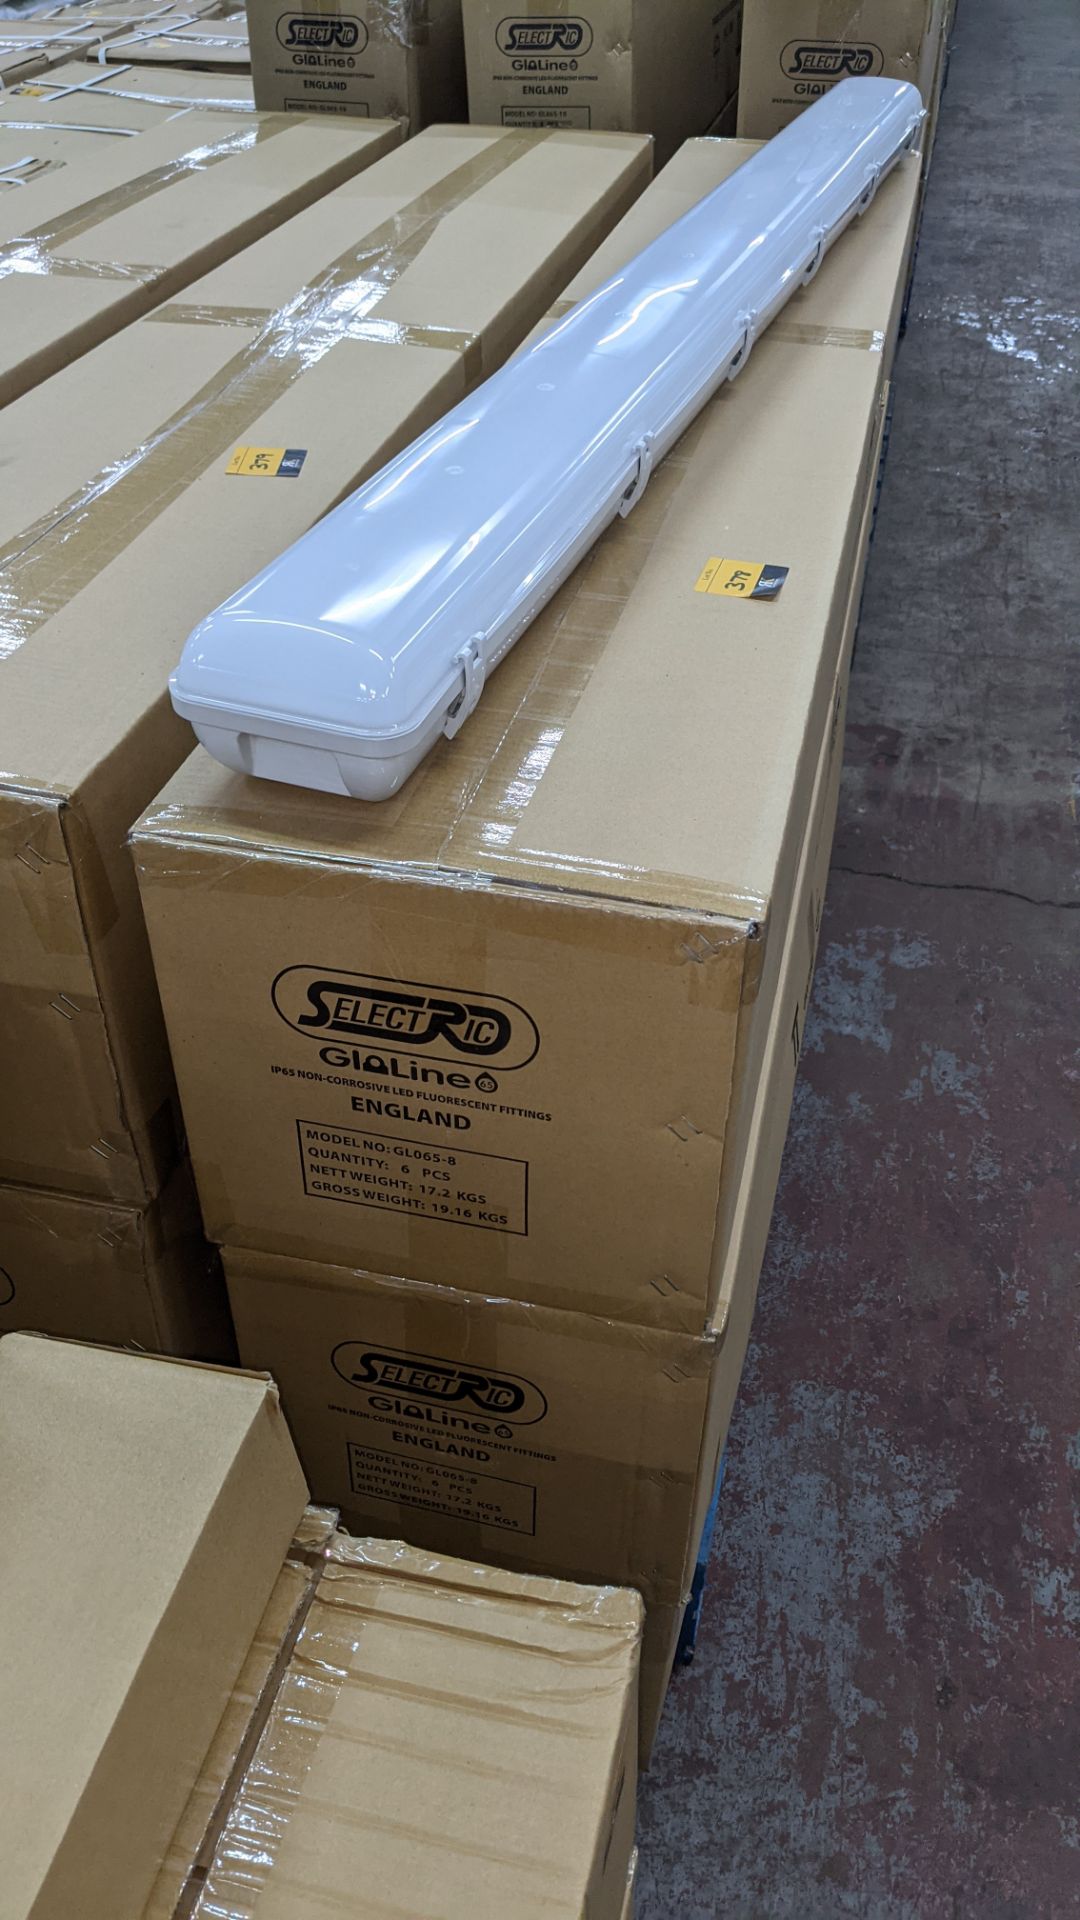 18 off IP65 non-corrosive LED fluorescent light fittings. Model GLO65-8, 5', twin LED 60W (with eme